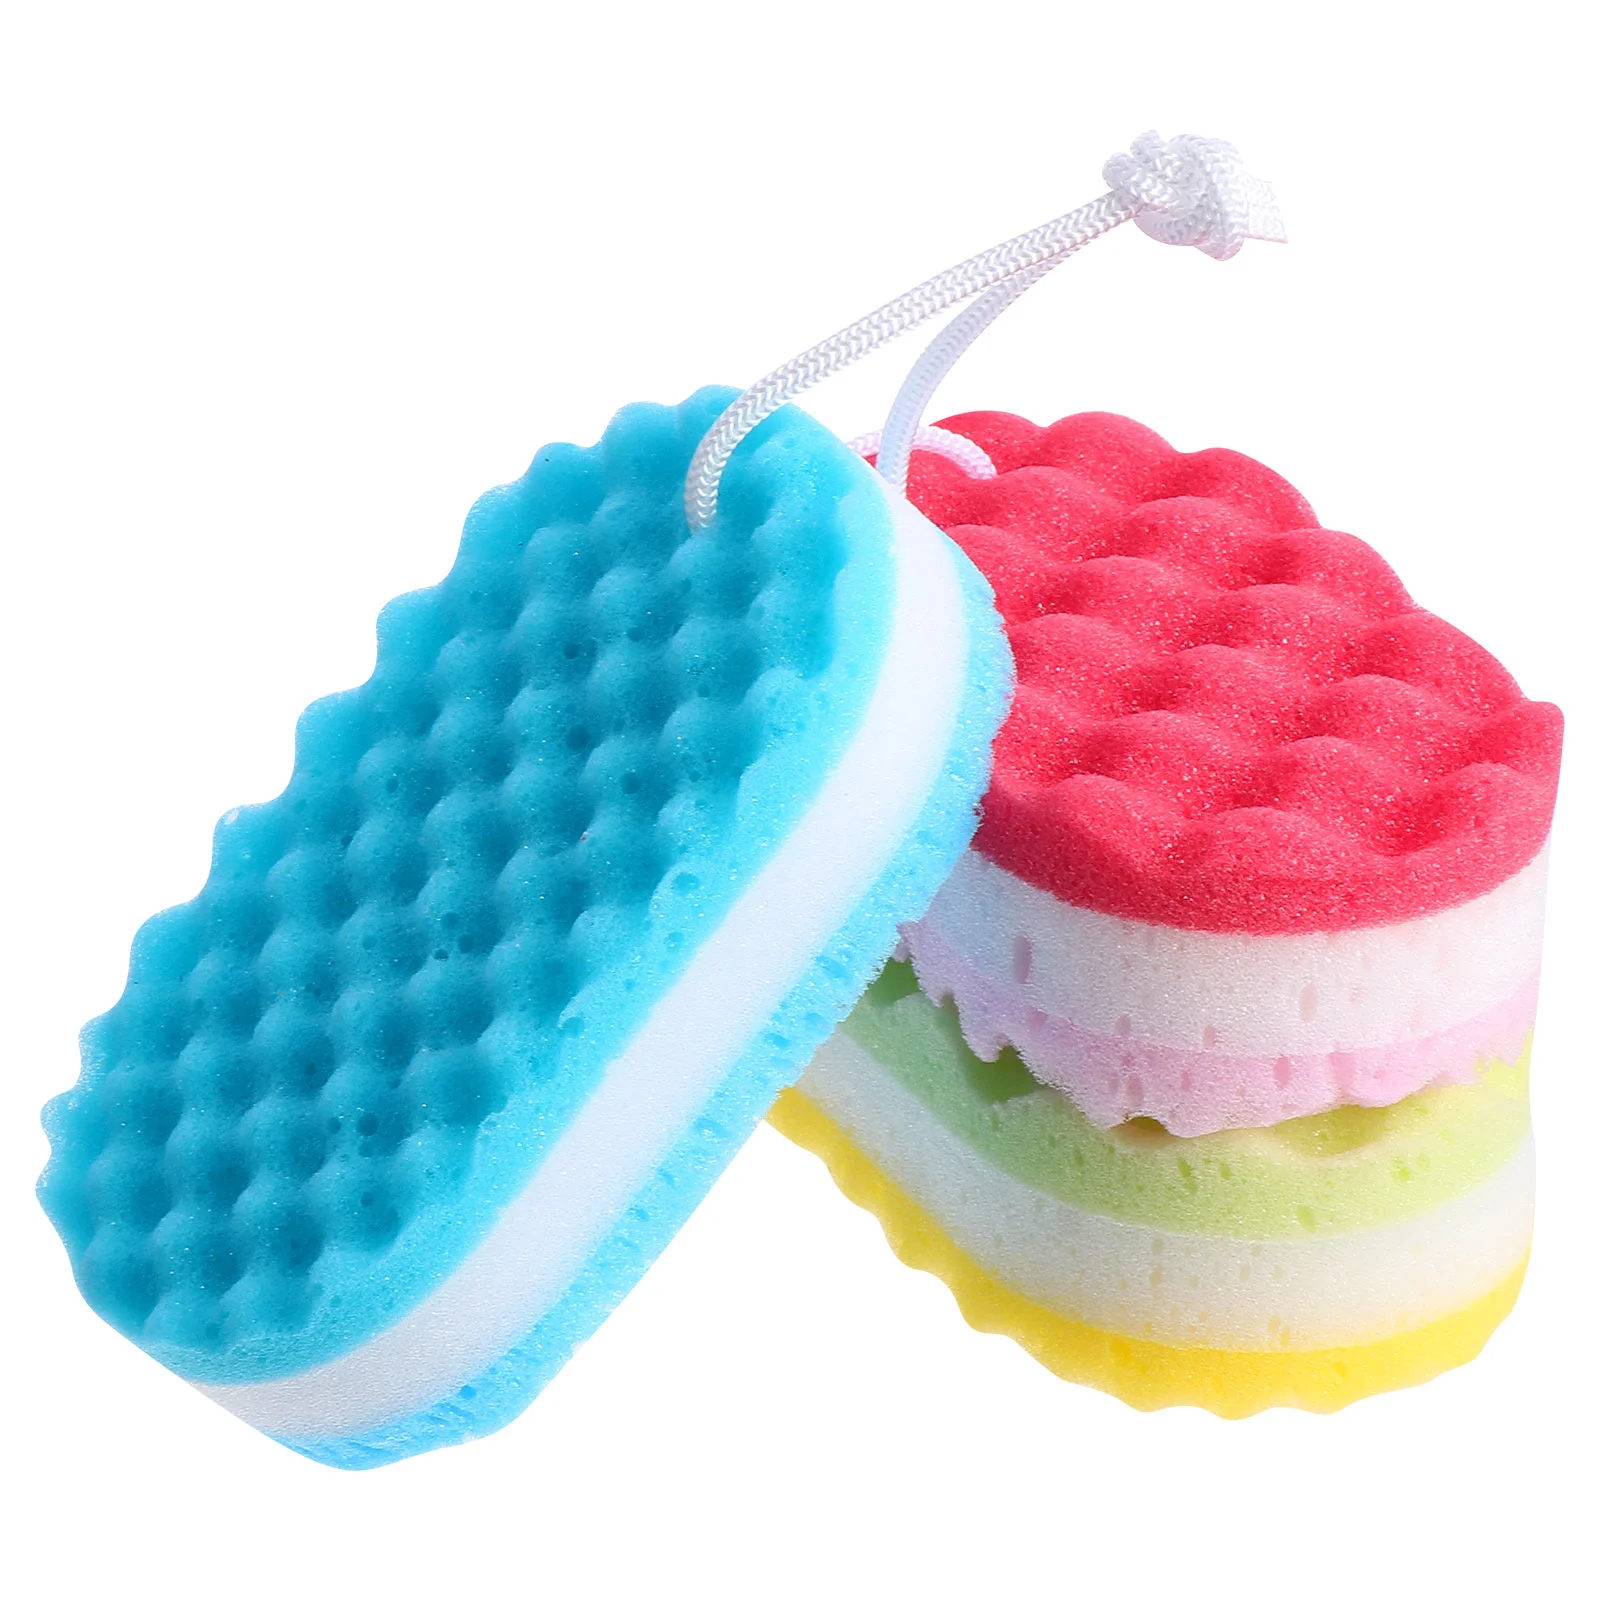 

Sponge Body Shower Scrubber Bath Loofah Exfoliating Sponges Cleaning Exfoliator Loofahs Wash Painless Bathing Supplies Tool